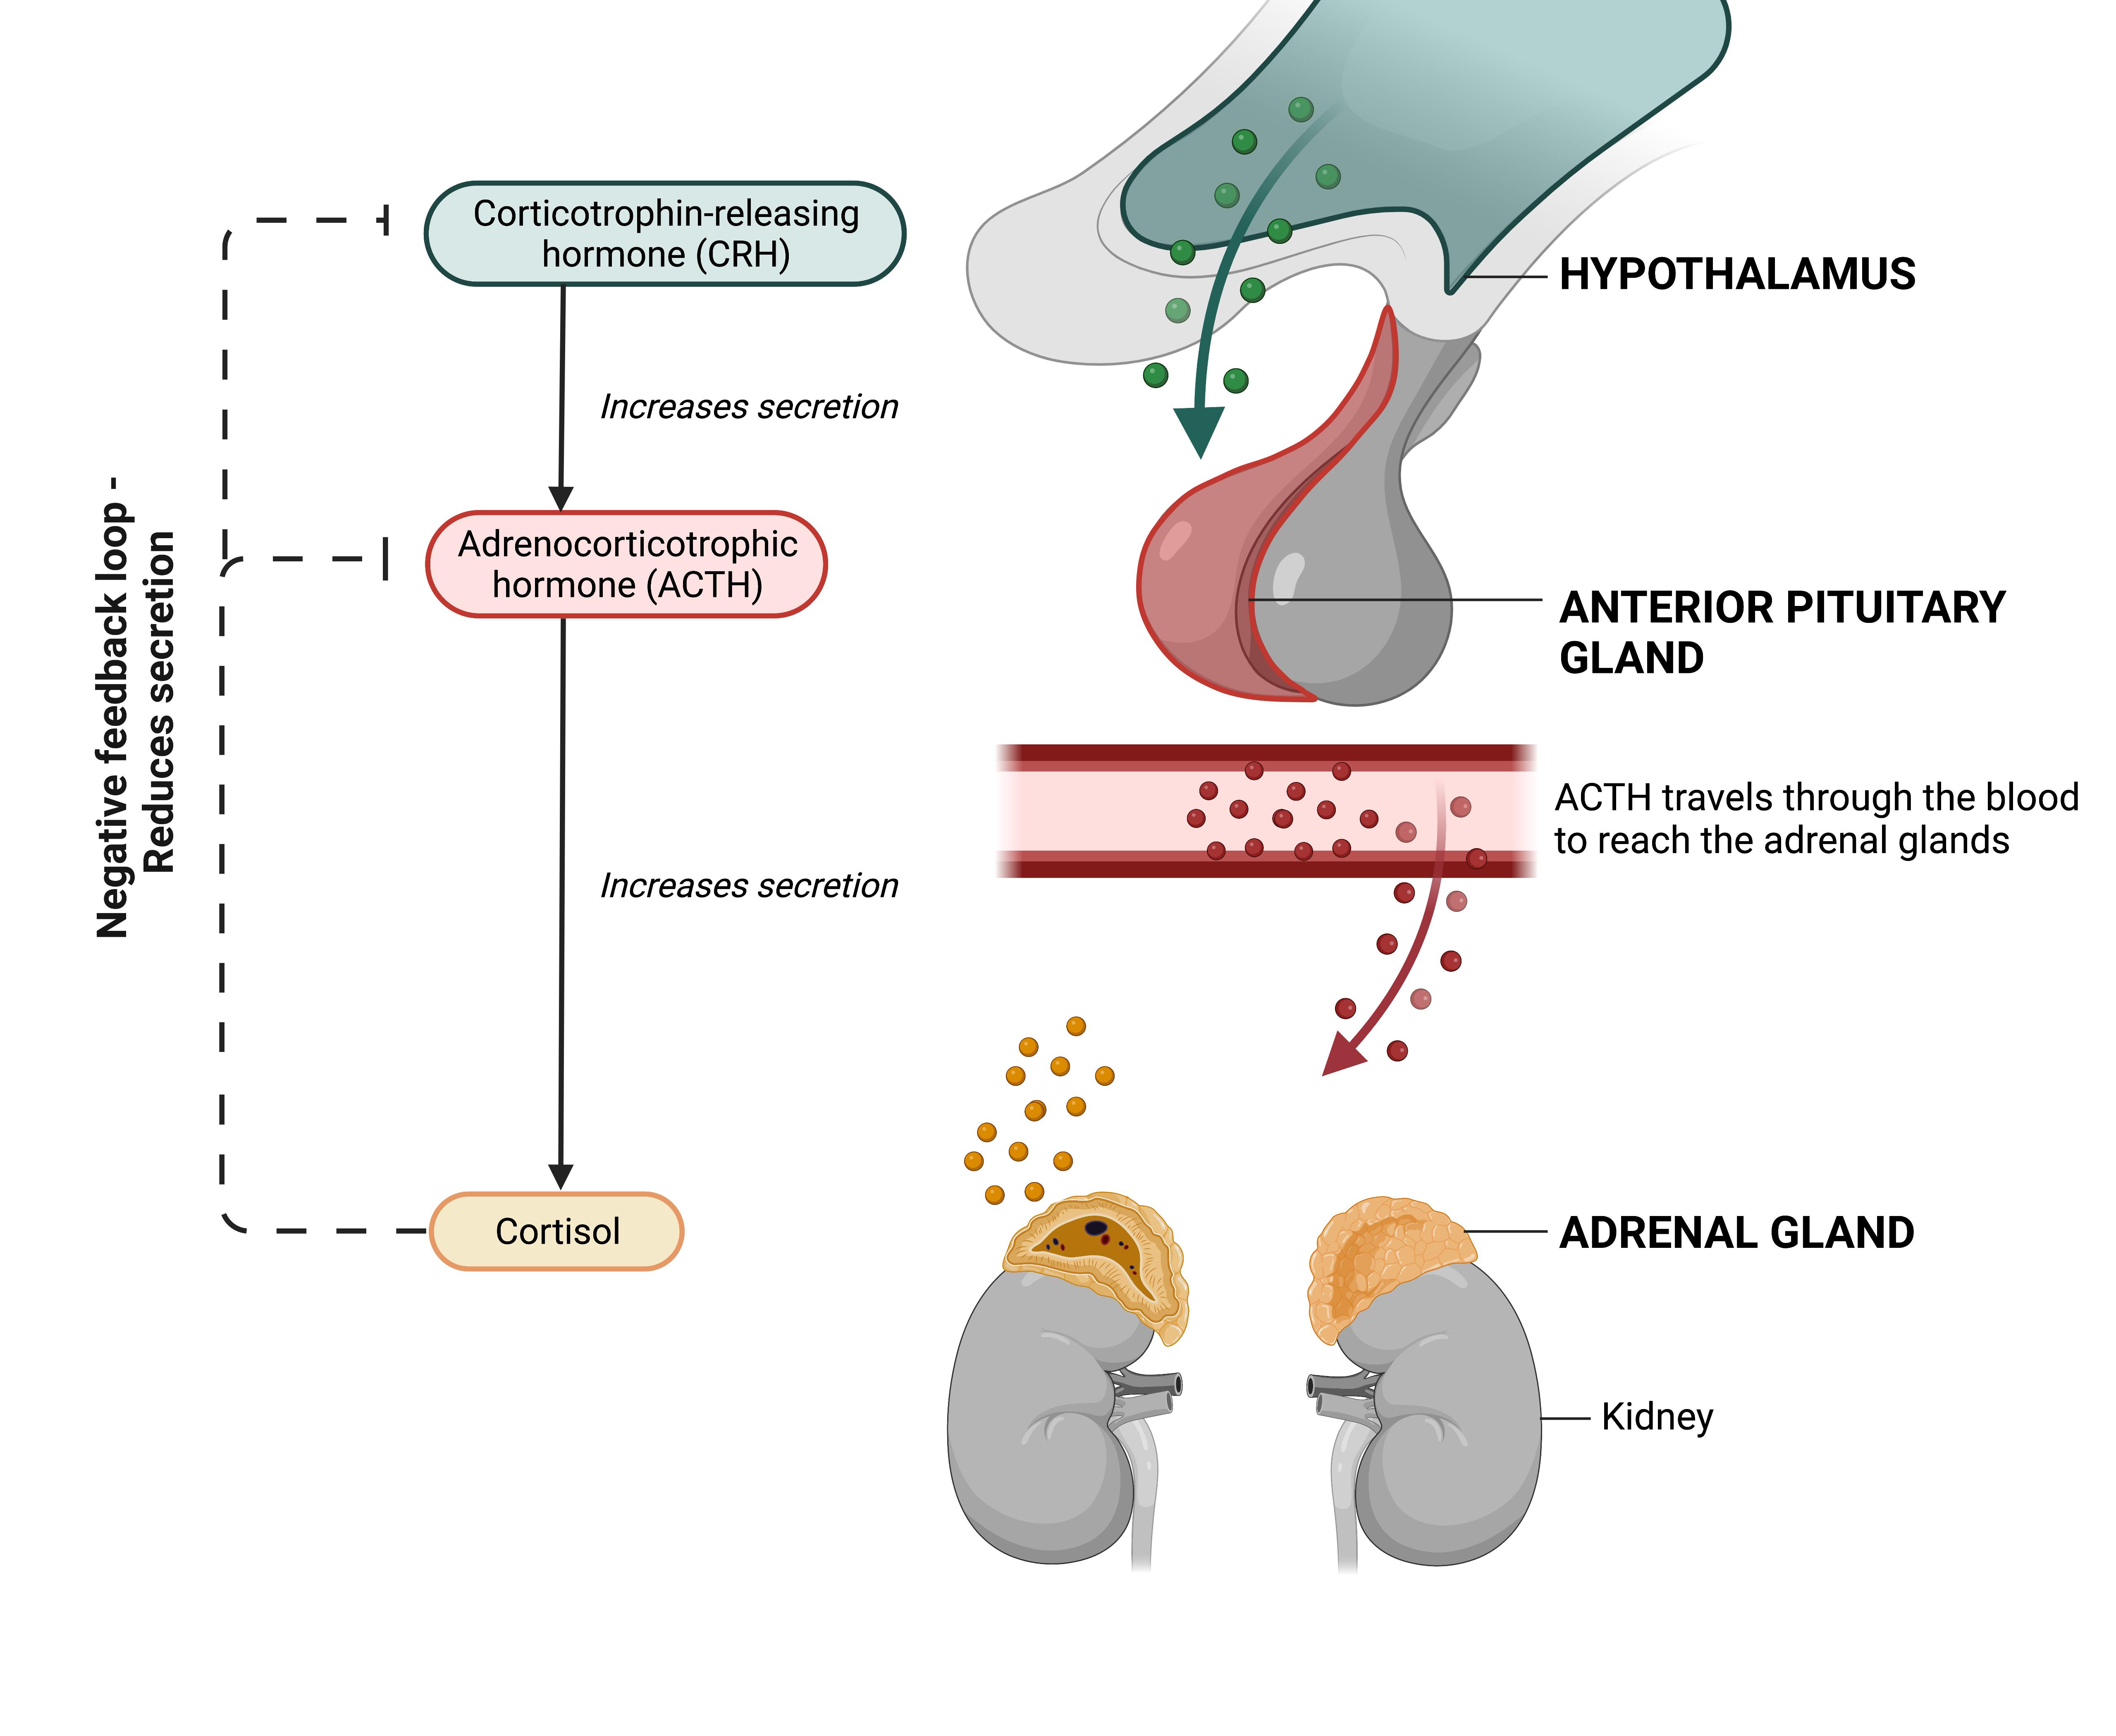 The hypothalamus secretes corticotrophin-releasing hormone (CRH) which stimulates the <a  href='/glossary/a#anterior' data-toggle='popover' data-trigger='hover' title='anterior' data-content='1751' >anterior</a> pituitary gland to secrete adrenocorticotrophic hormone (ACTH). ACTH travels via the bloodstream and stimulate the secretion of cortisol from the adrenal glands. As the cortisol levels rise, this blocks the release of CRH from the hypothalamus and ACTH from the anterior pituitary gland. As a result, the reduction in CRH and ACTH levels lead to reduced cortisol levels. This is called a <a  href='/glossary/n#negative-feedback' data-toggle='popover' data-trigger='hover' title='negative feedback' data-content='1853' >negative feedback</a> loop.